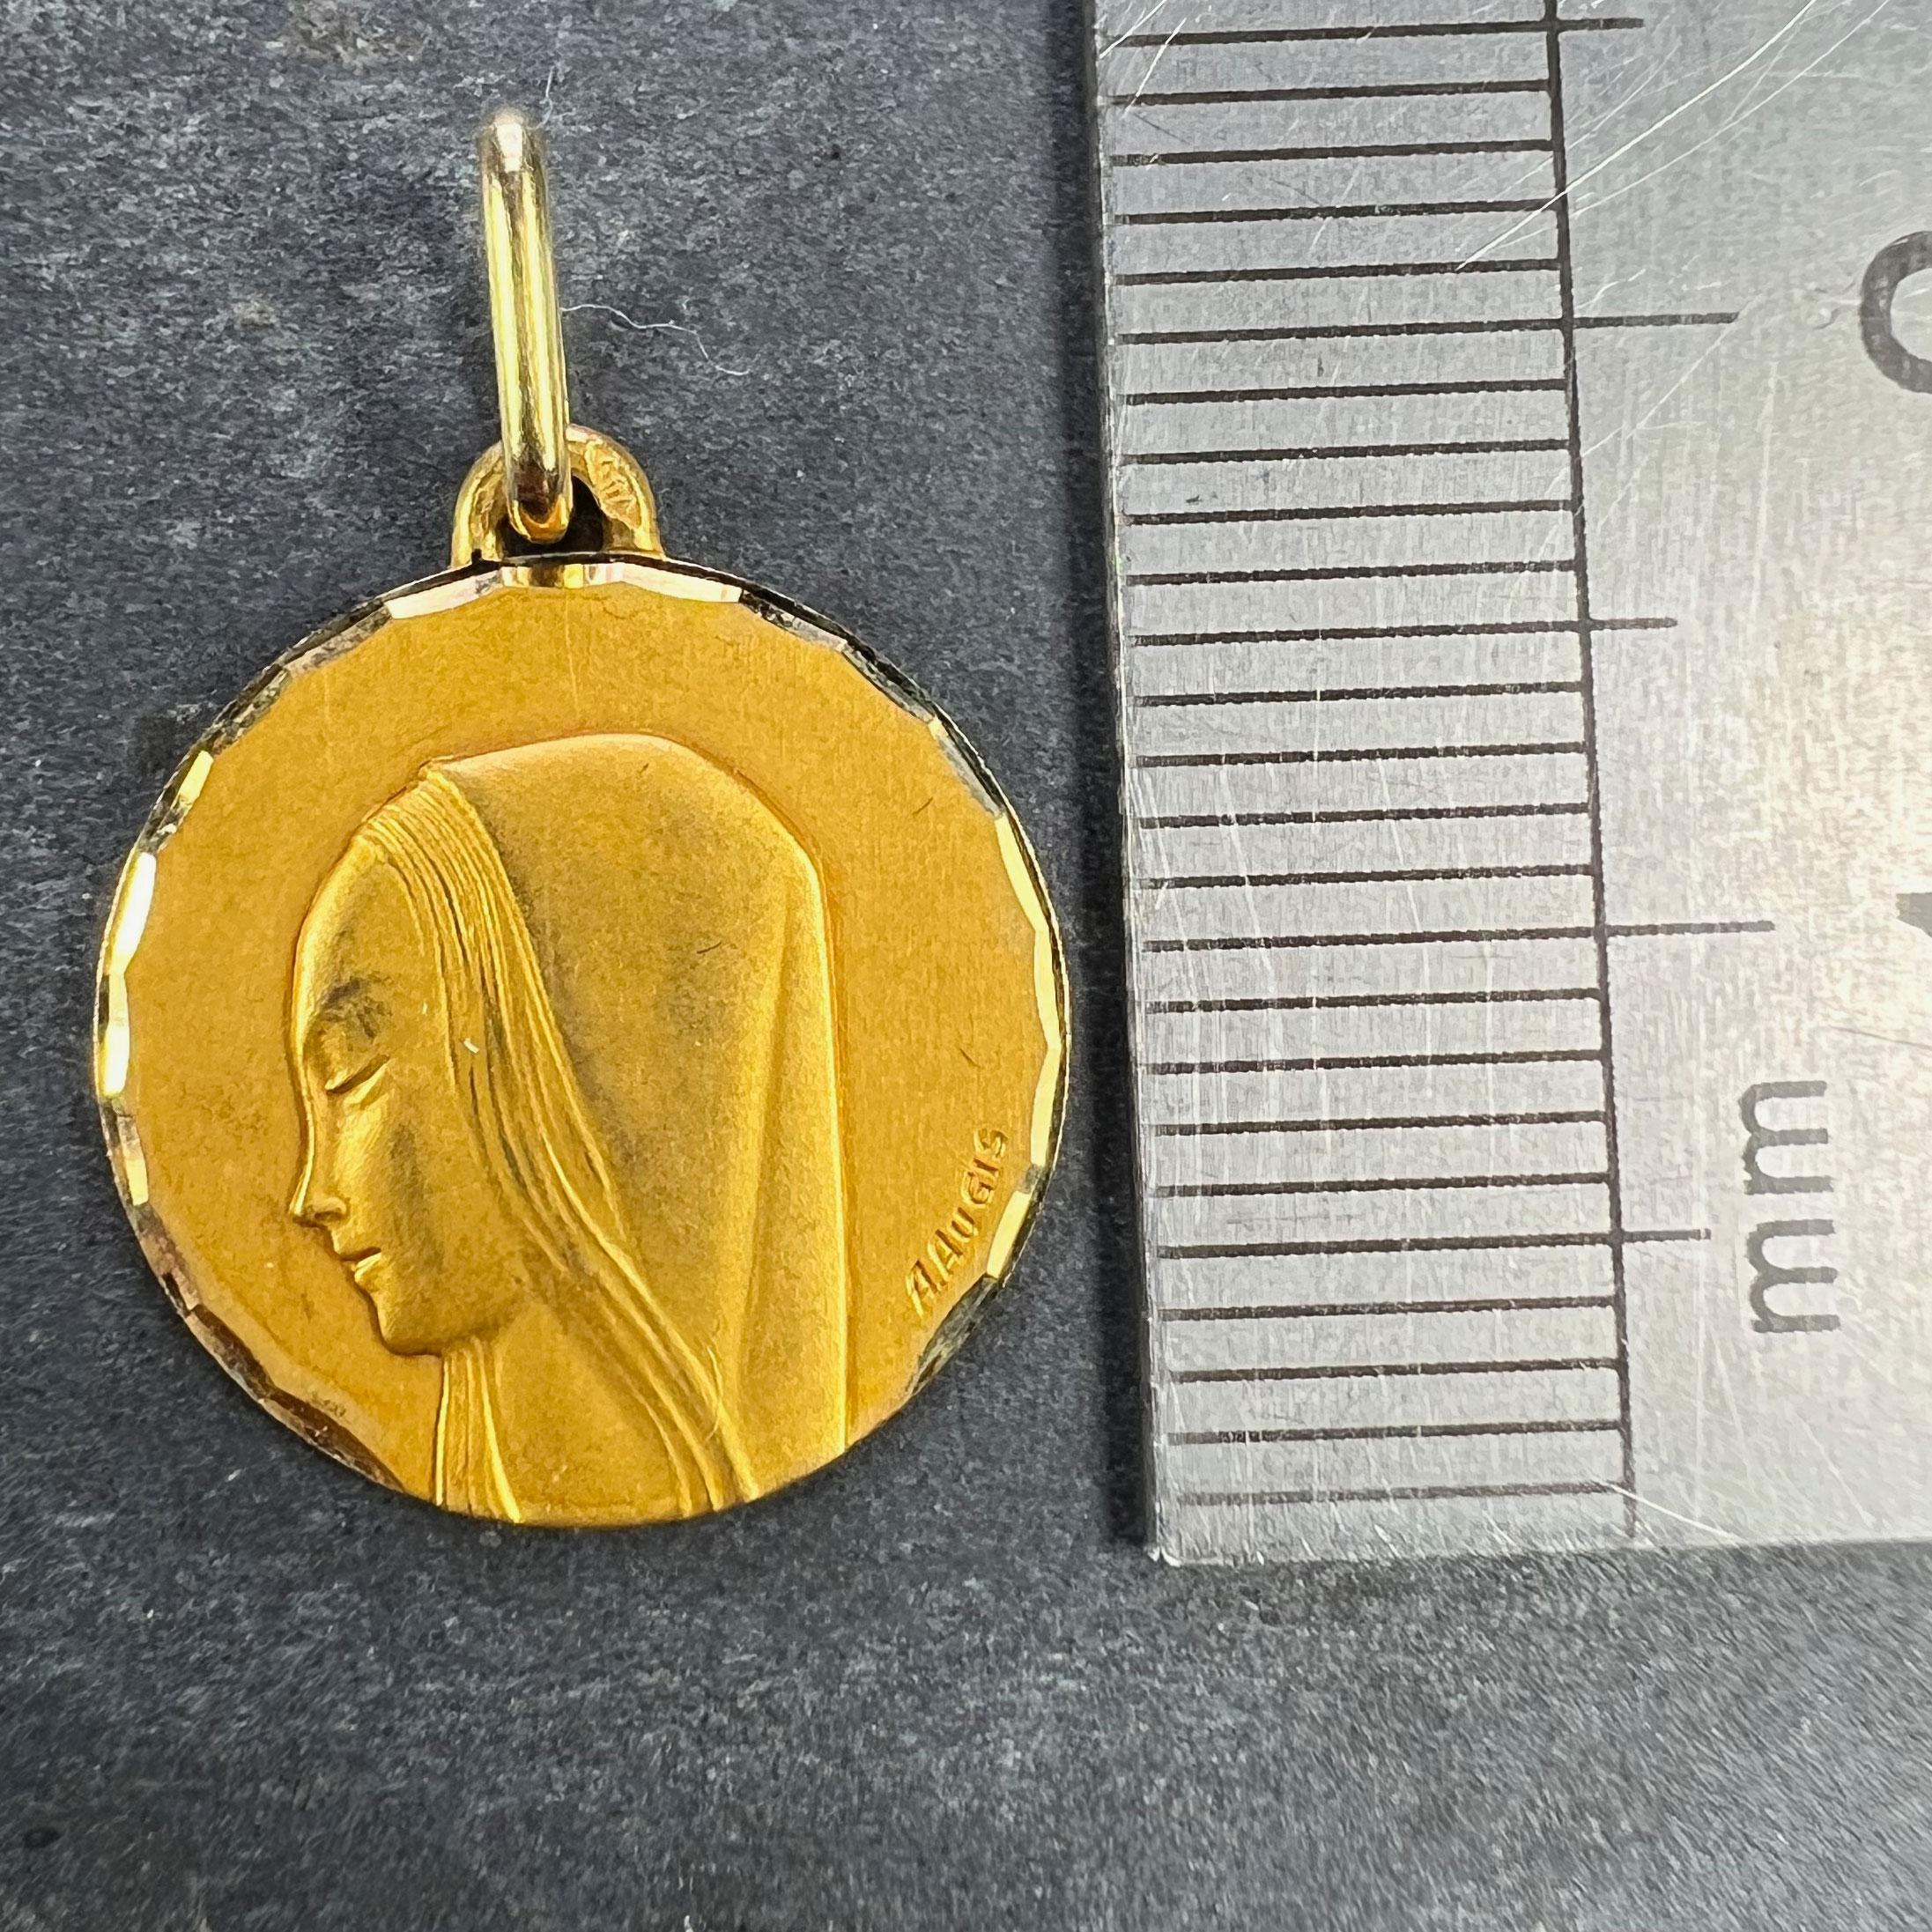 French Augis Virgin Mary 18K Yellow Gold Religious Medal Pendant For Sale 6